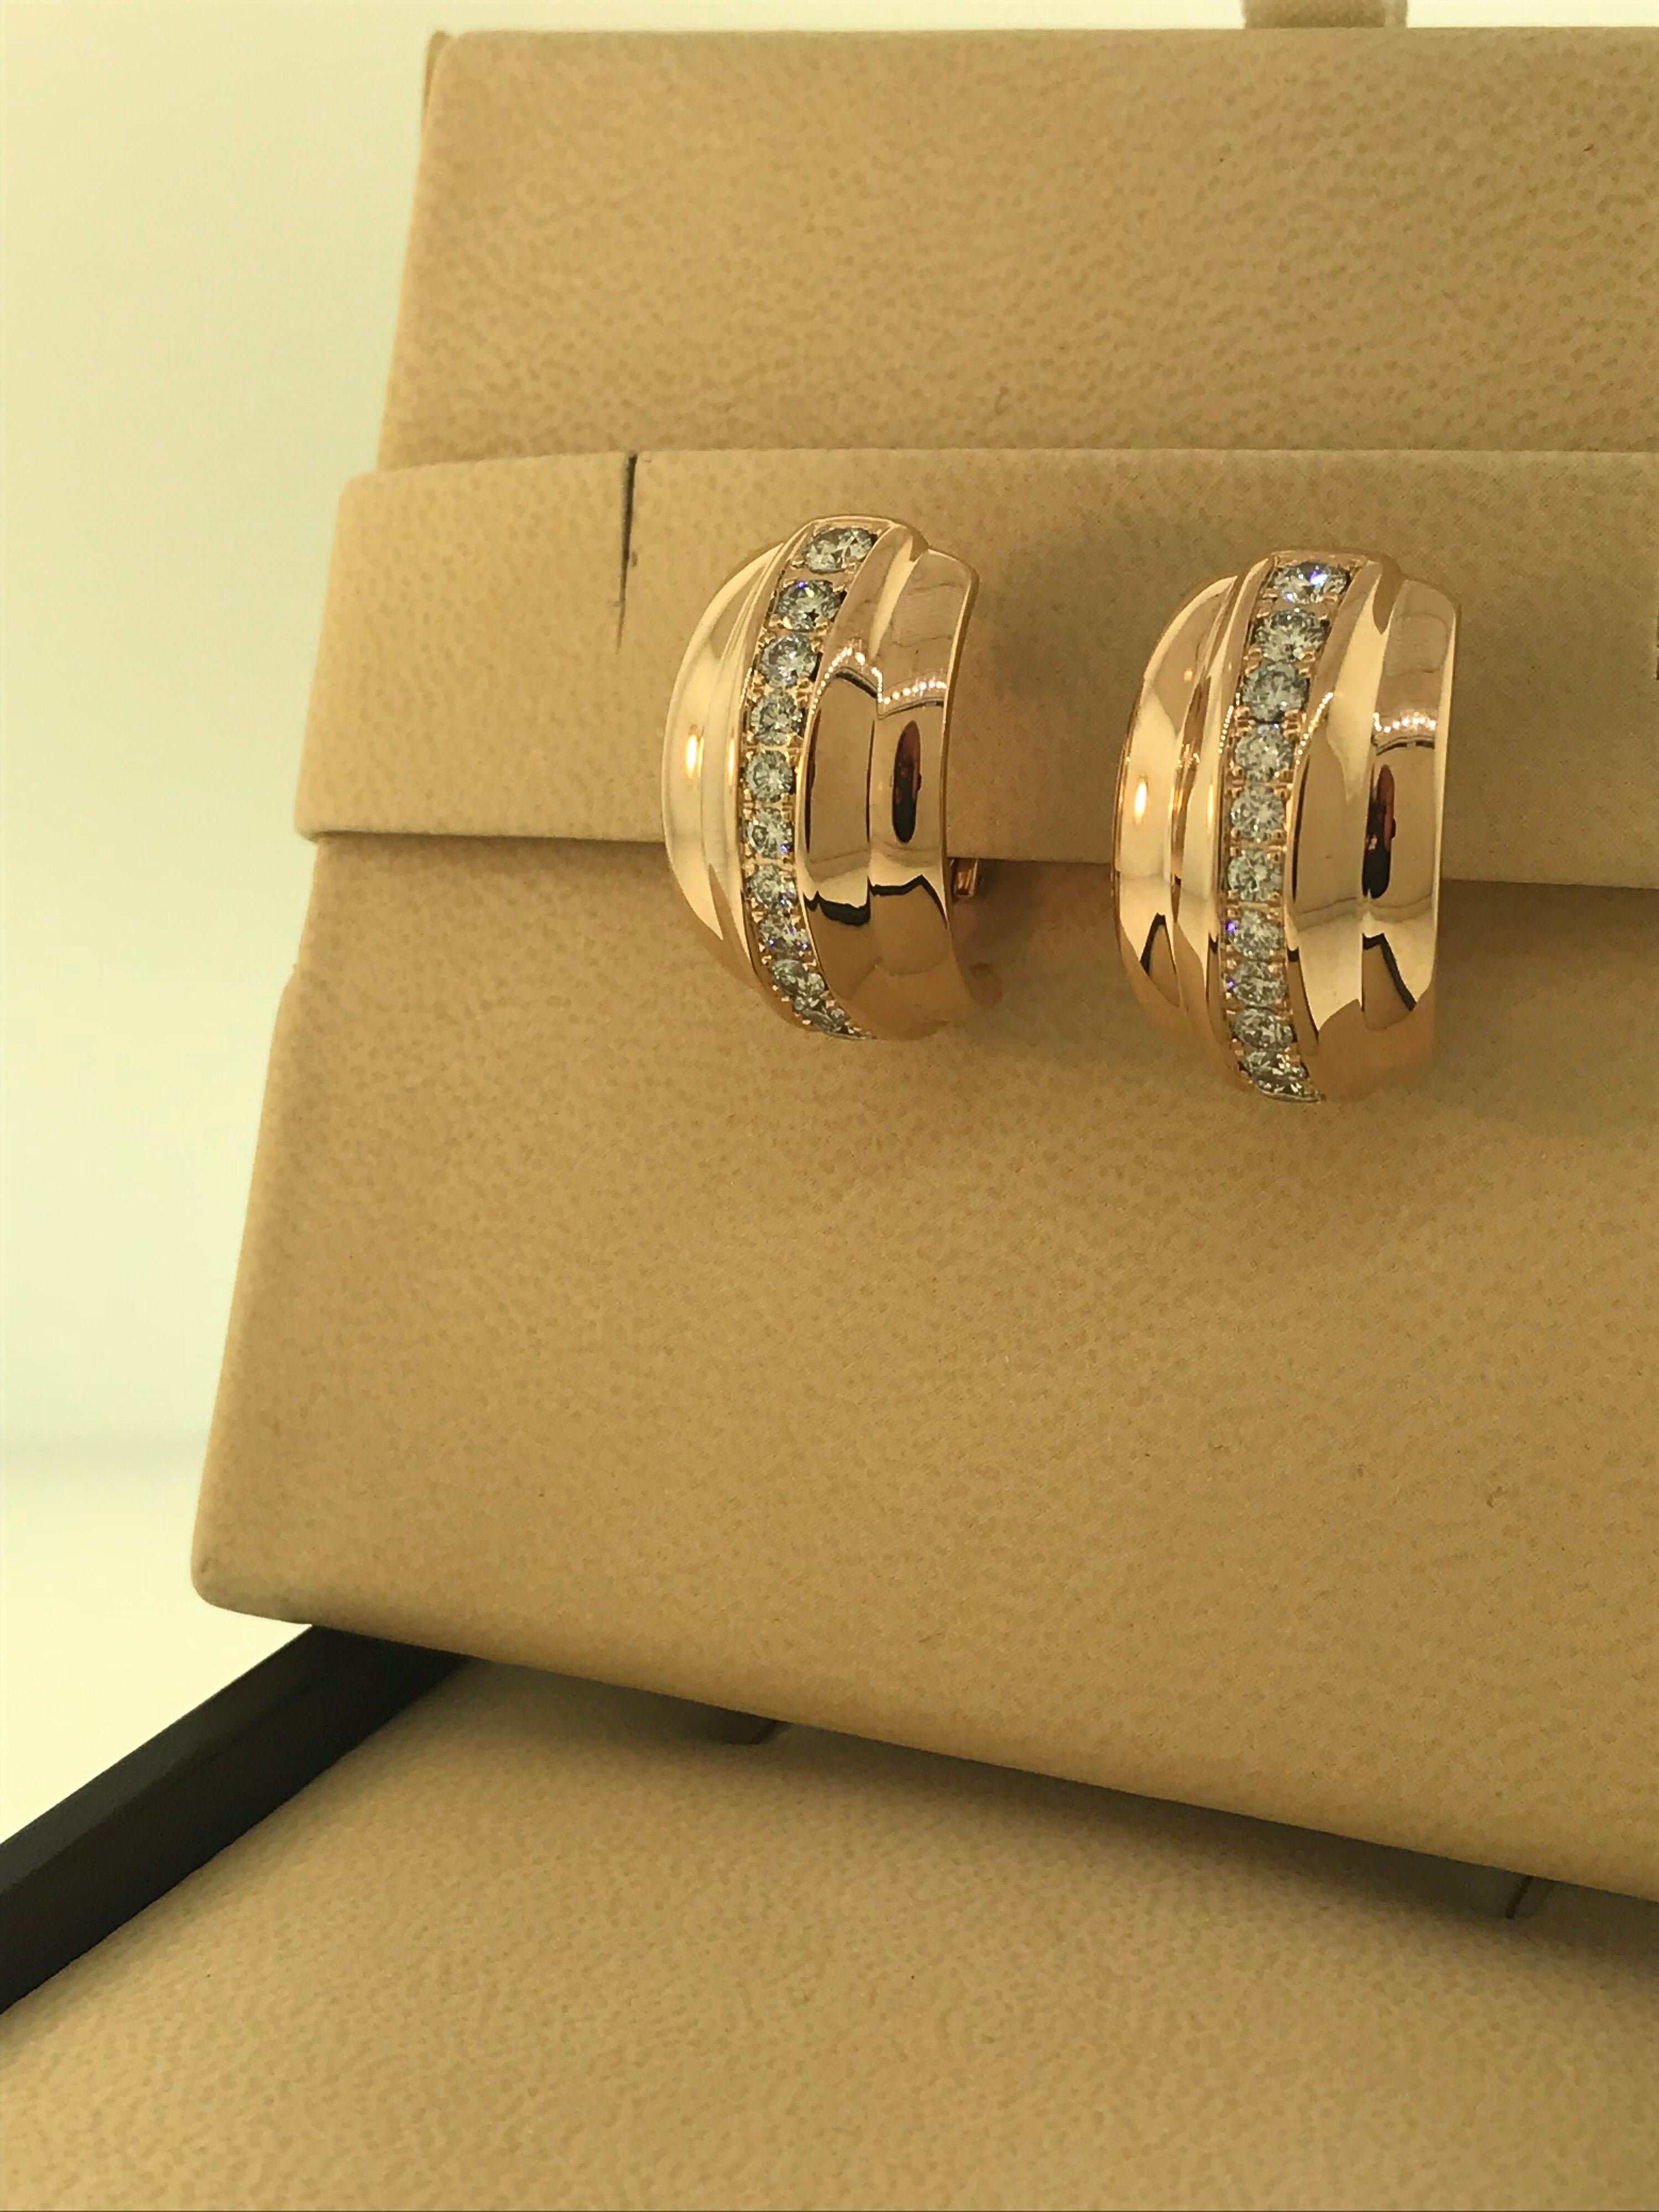 Chopard La Strada Earrings

Model Number: 84/9399-5001

100% Authentic

Brand New

Comes with original Chopard box, certificate of authenticity and warranty and jewels manual

18 Karat Rose Gold

24 Diamonds on the Earrings (1.80 Carats)

Earrings